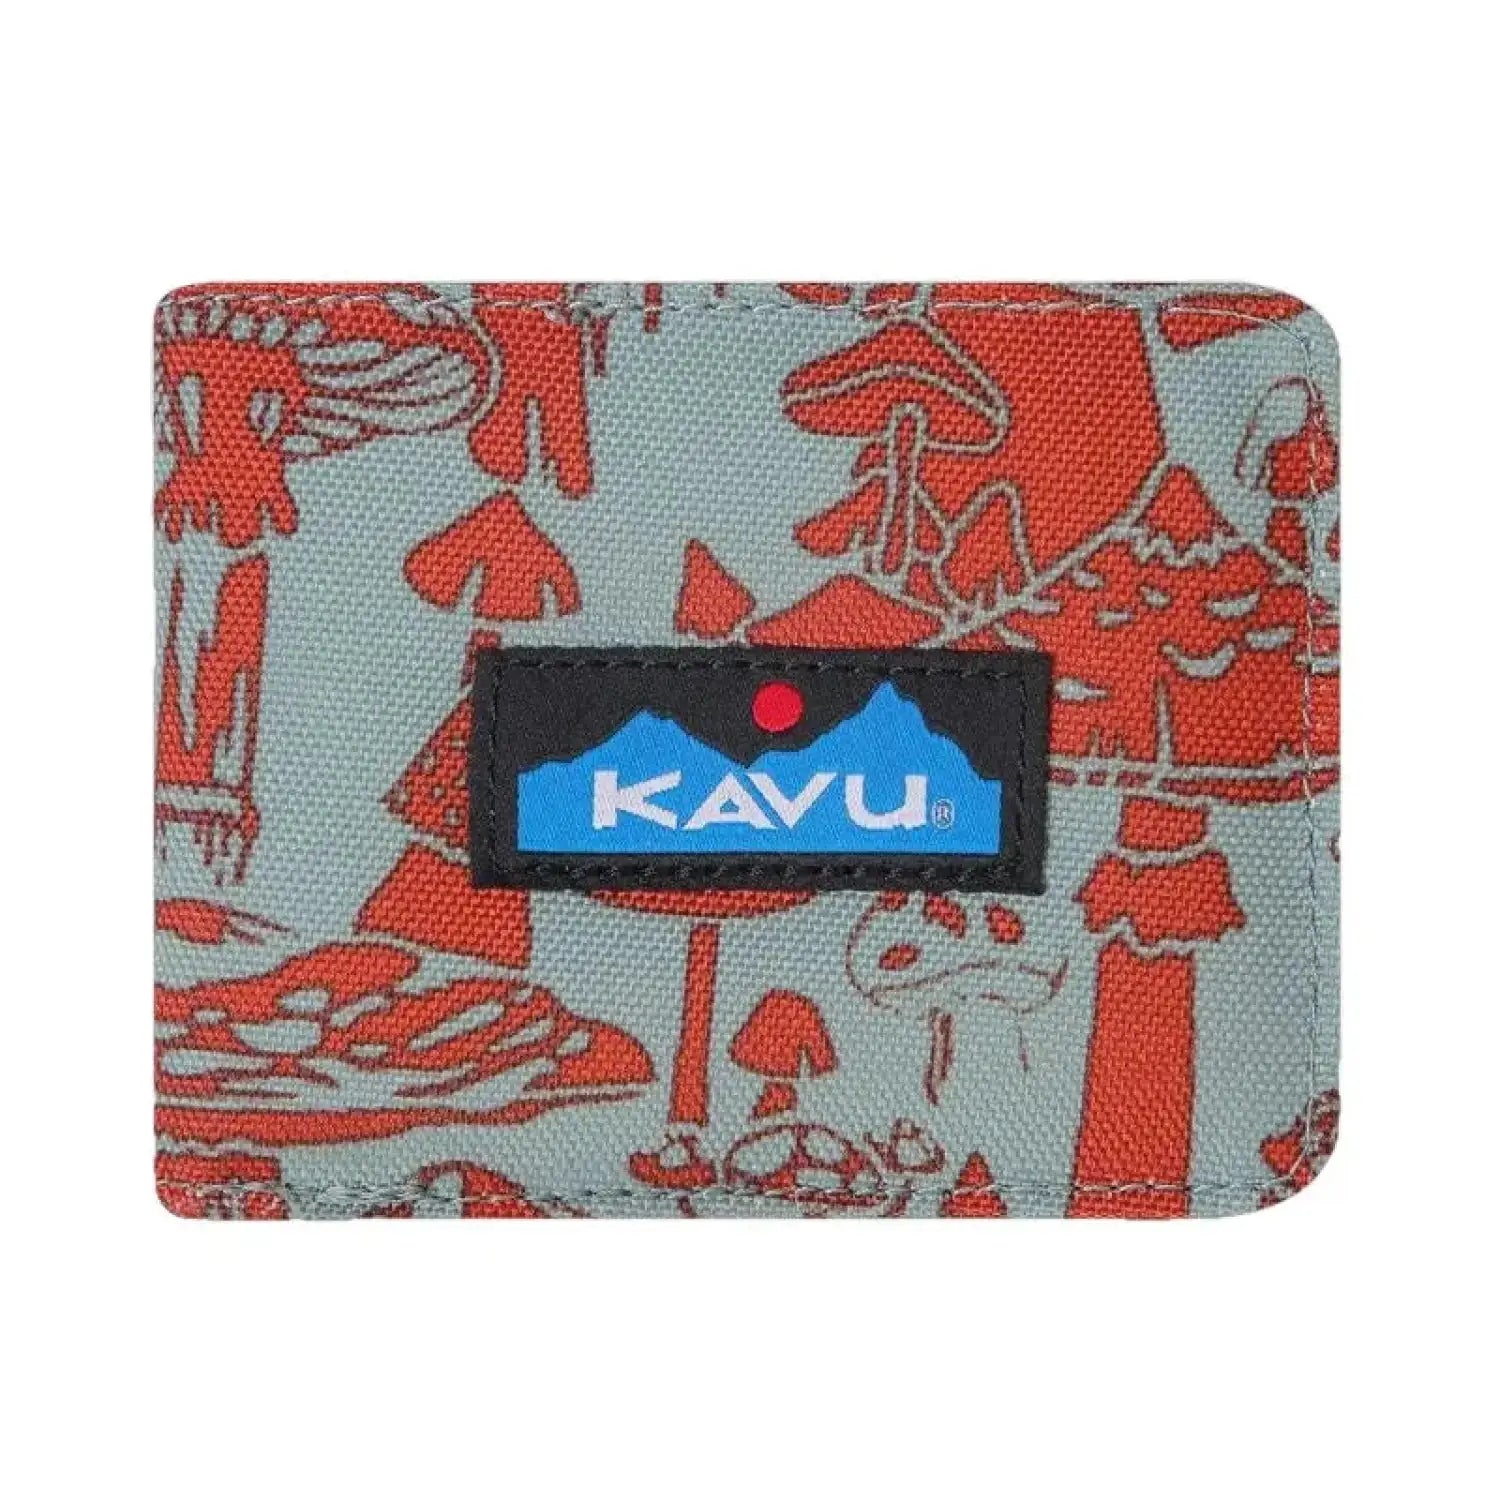 Kavu Watershed Wallet in farout forage color. Light blue with red mushroom design. Front view with Kavu logo.